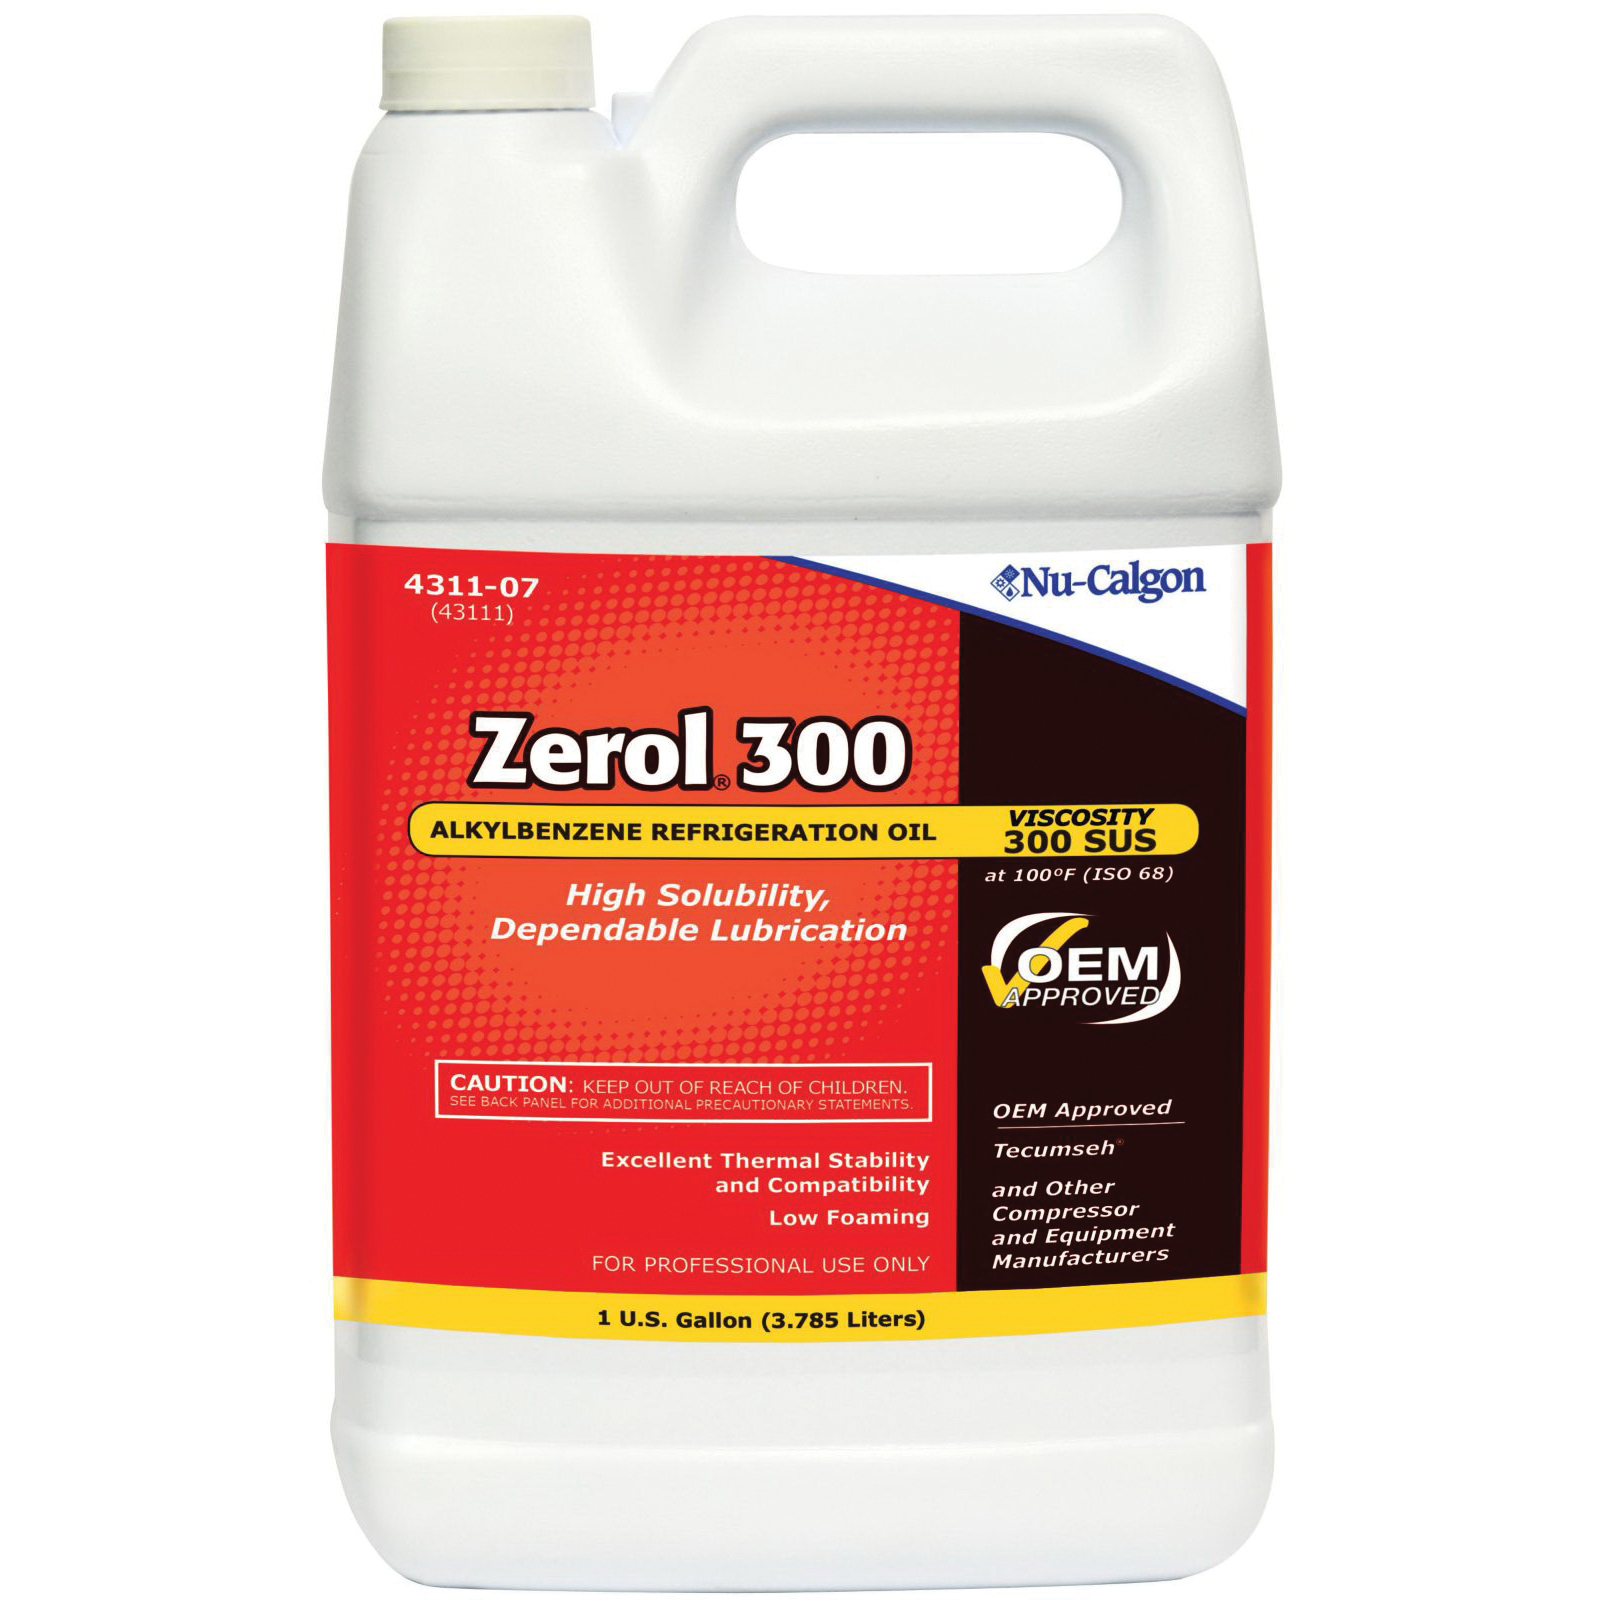 Nu-Calgon Zerol 4311-07 Alkylbenzene Refrigeration Oil, 1 gal, Clear and Colorless